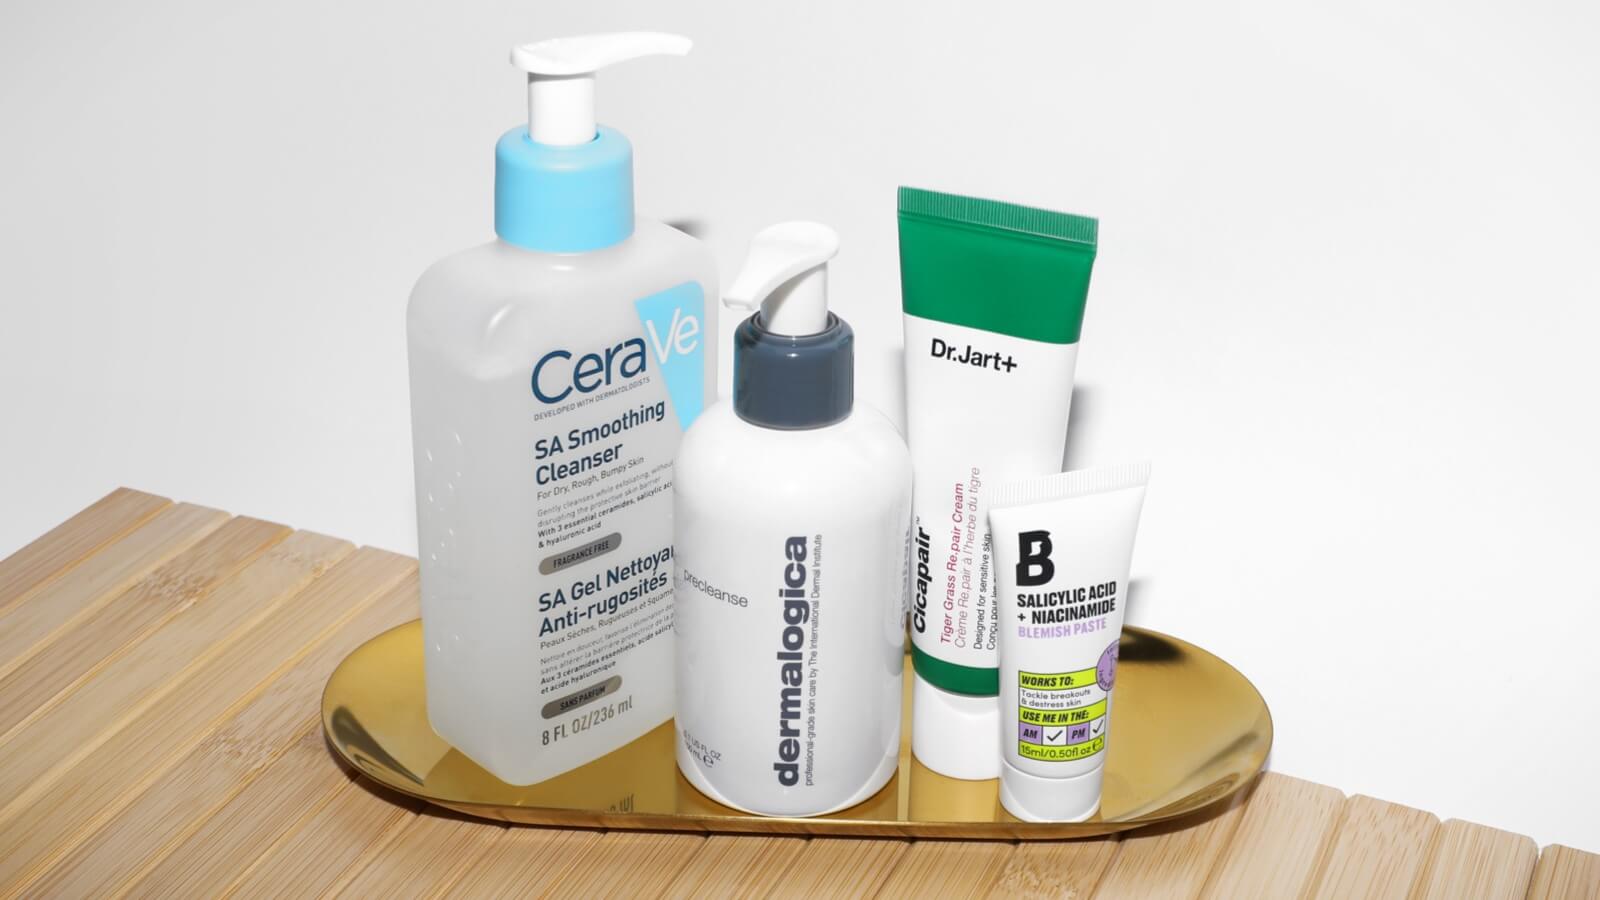 A 6-Step Evening Skincare Routine For Acne-Prone Skin - Beauty Bay Edited